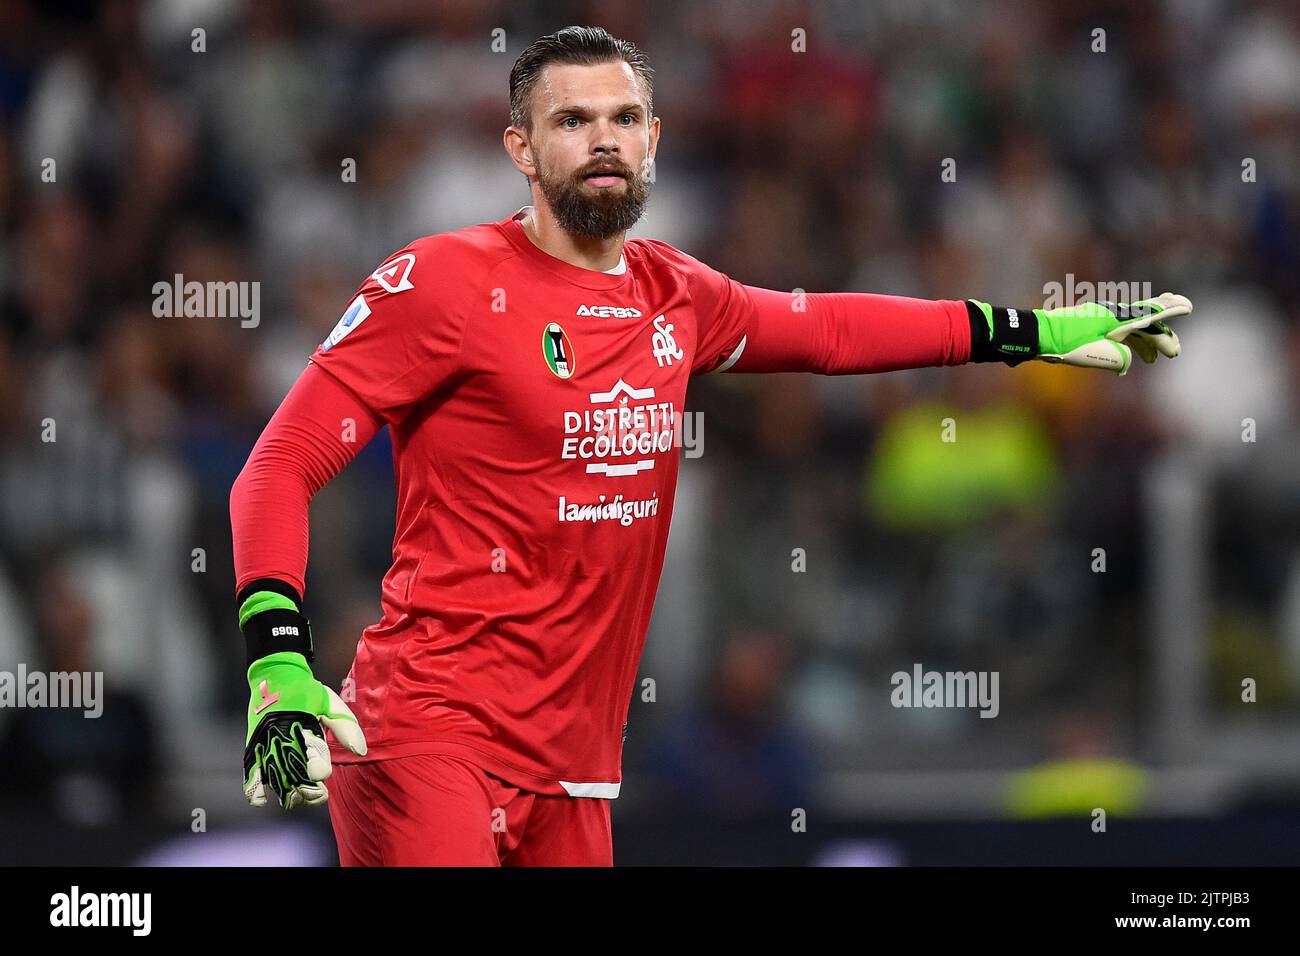 Turin, Italy. 31 August 2022. Bartlomiej Dragowski of Spezia Calcio gestures during the Serie A football match between Juventus FC and Spezia Calcio. Credit: Nicolò Campo/Alamy Live News Stock Photo